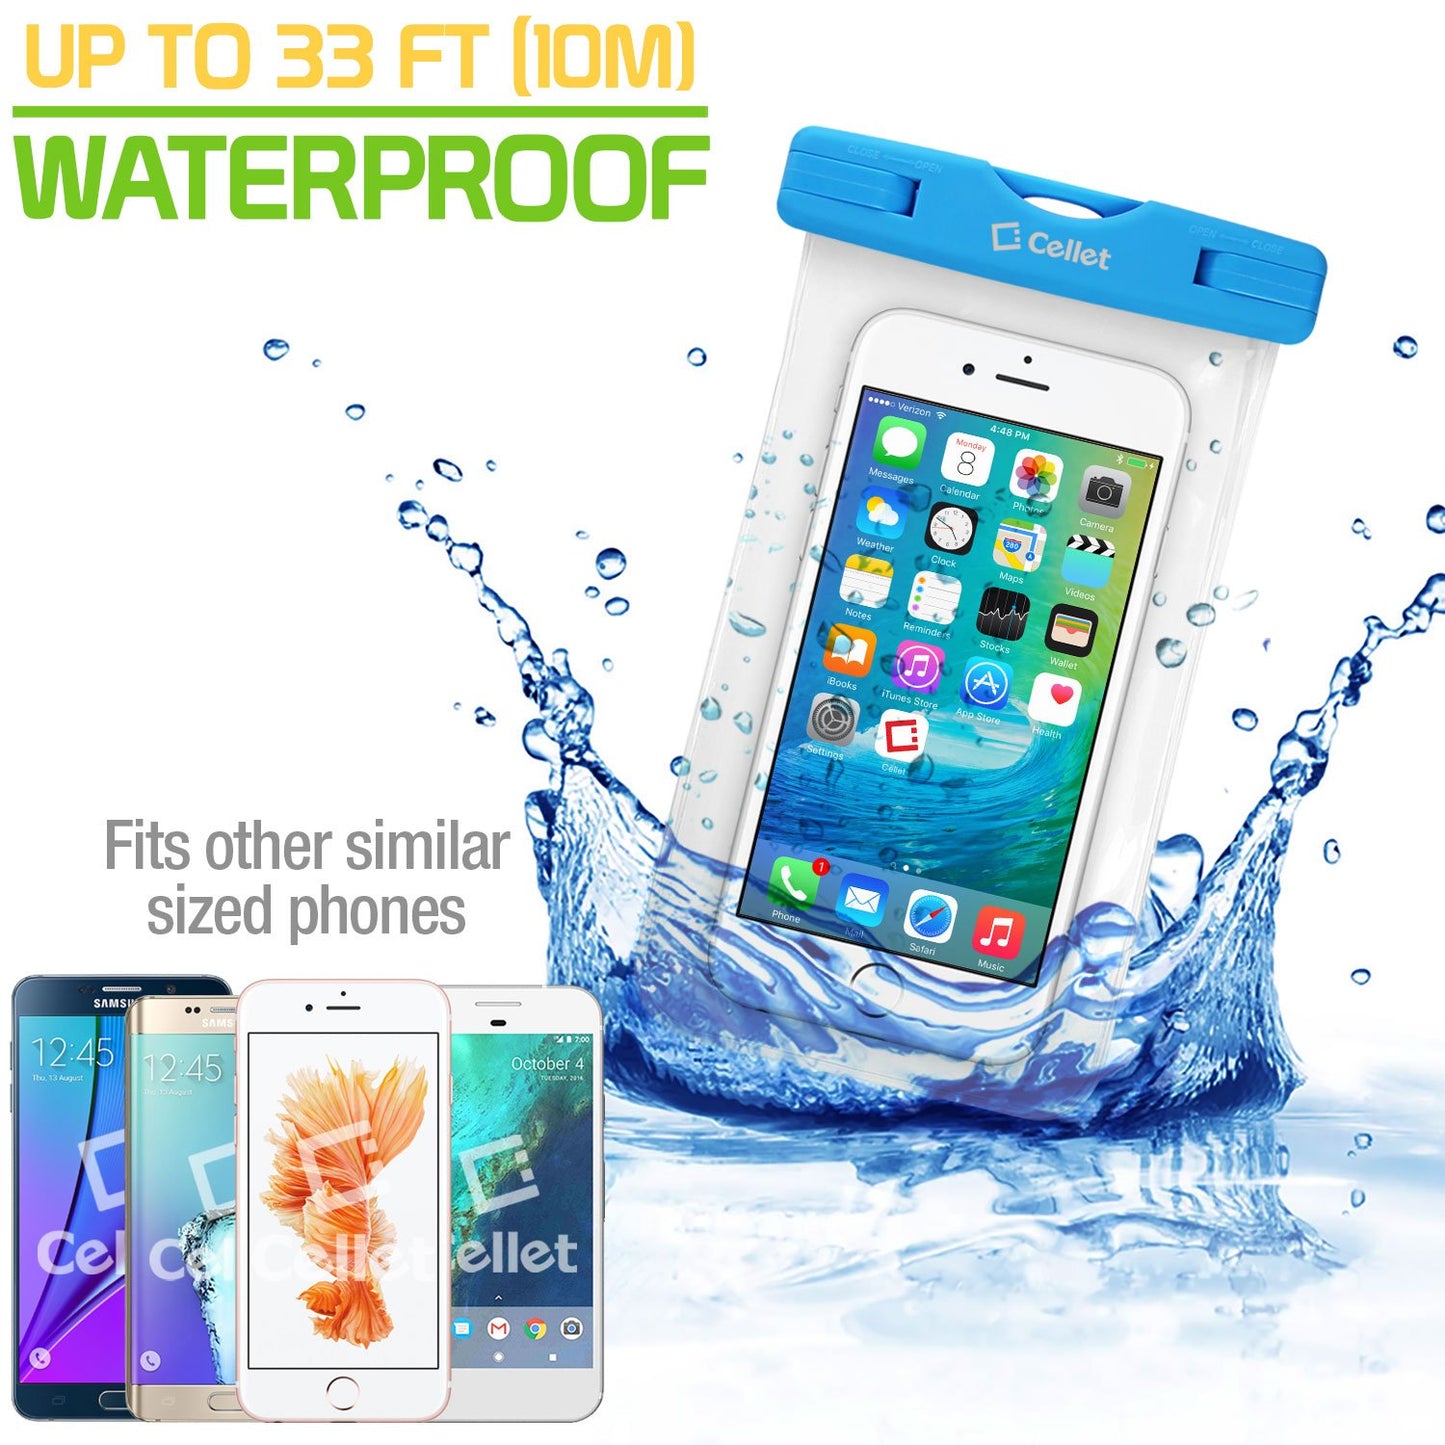 WATER1BL - Cellet Universal IPX8 Waterproof Case for Apple iPhone 7 Plus, Digital Cameras, MP3 Players and More - Blue